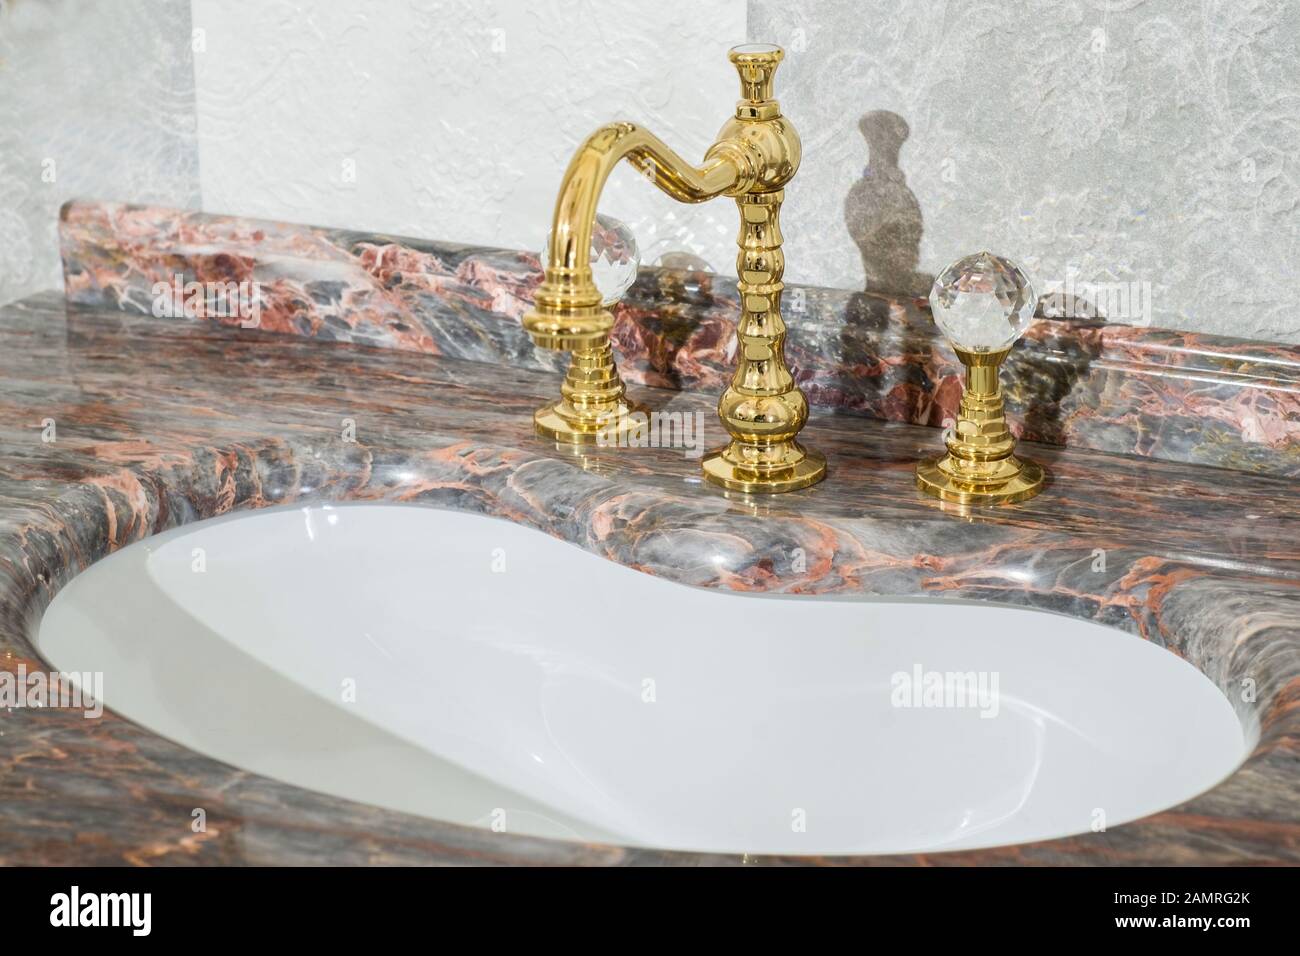 Sink Made Of Expensive Marble Stone Vintage Design Of Faucet And